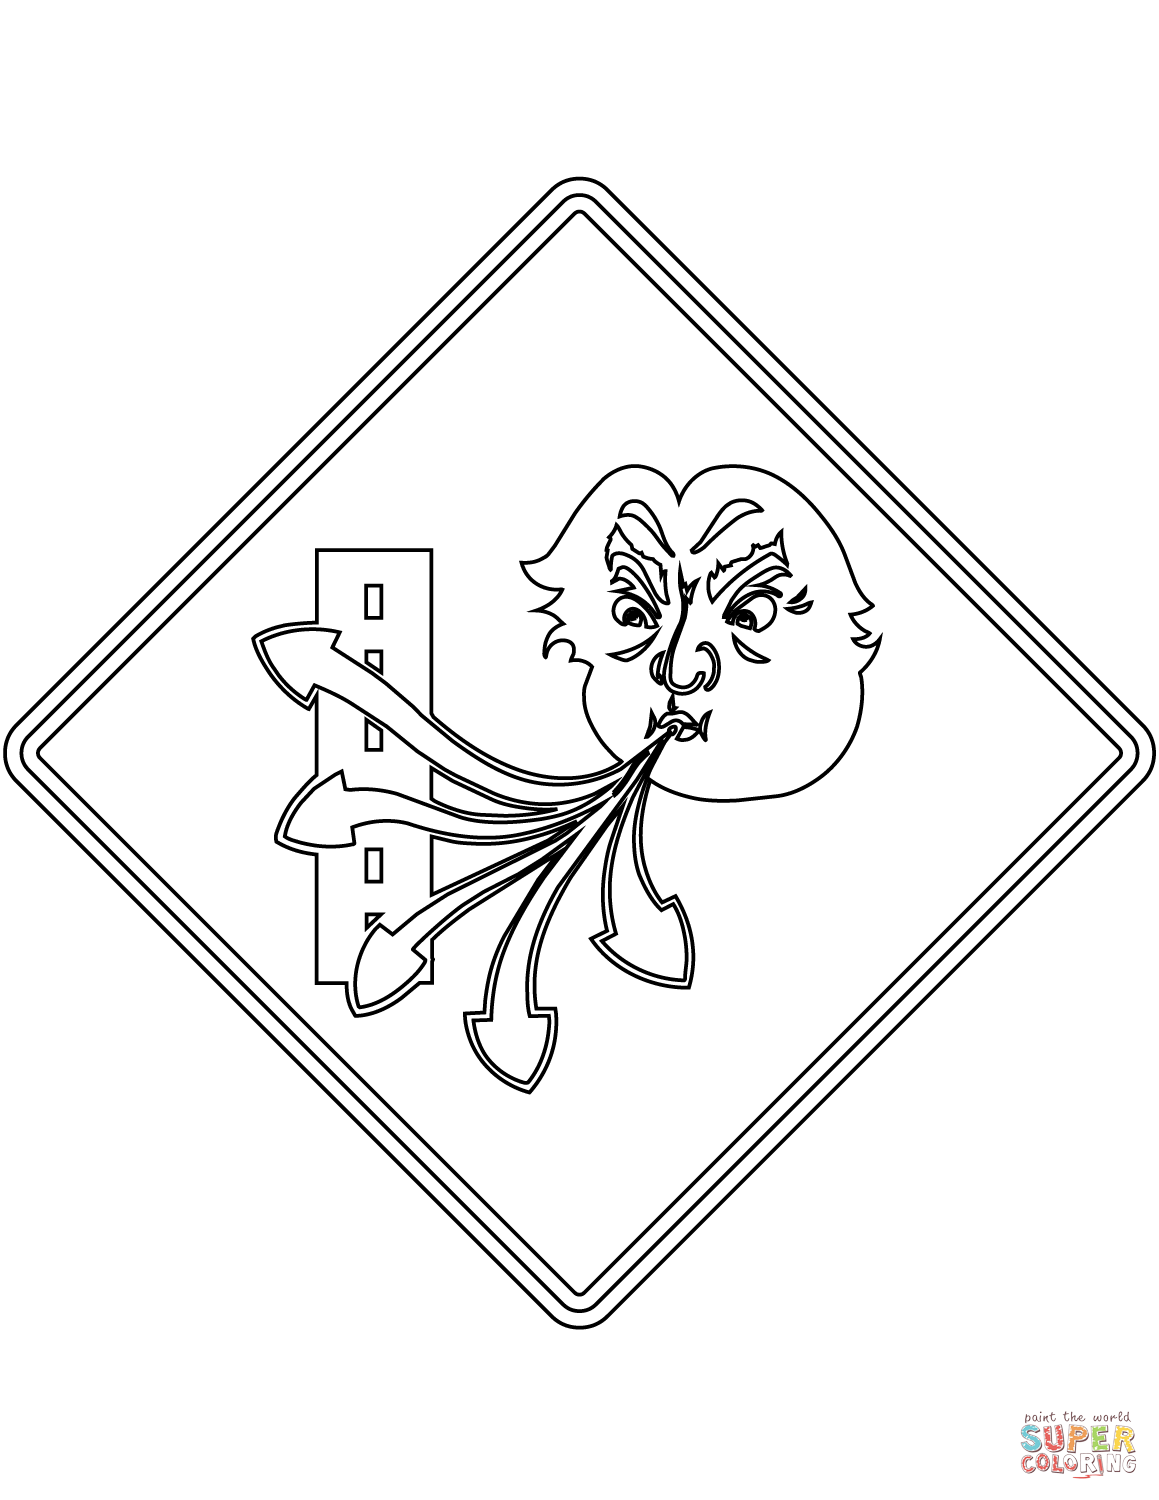 Warning sign for windy/gusty area in Quebec coloring page | Free ...